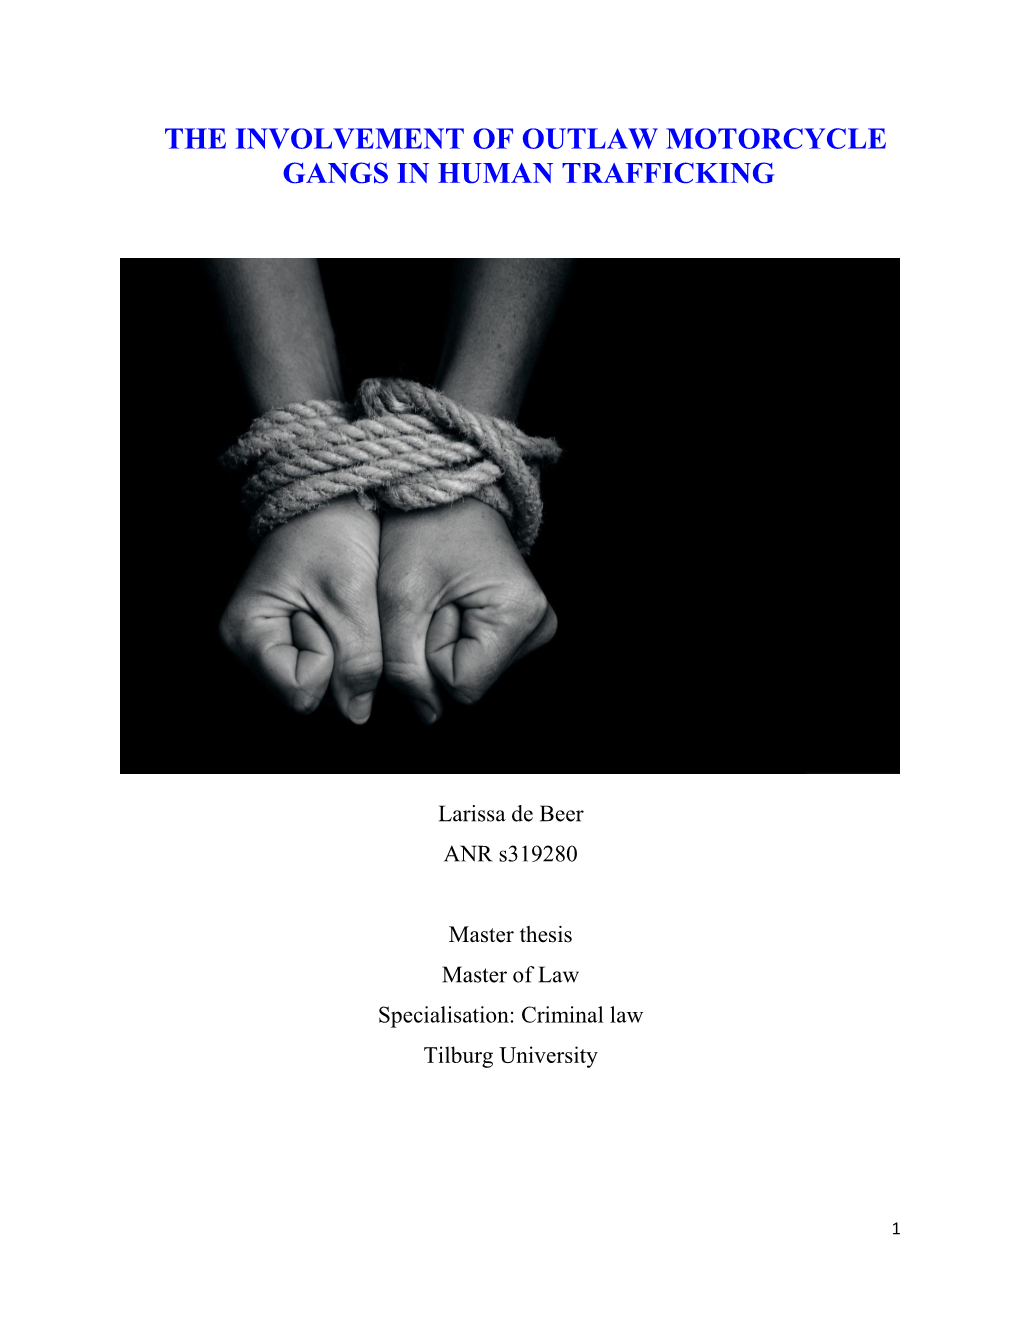 The Involvement of Outlaw Motorcycle Gangs in Human Trafficking